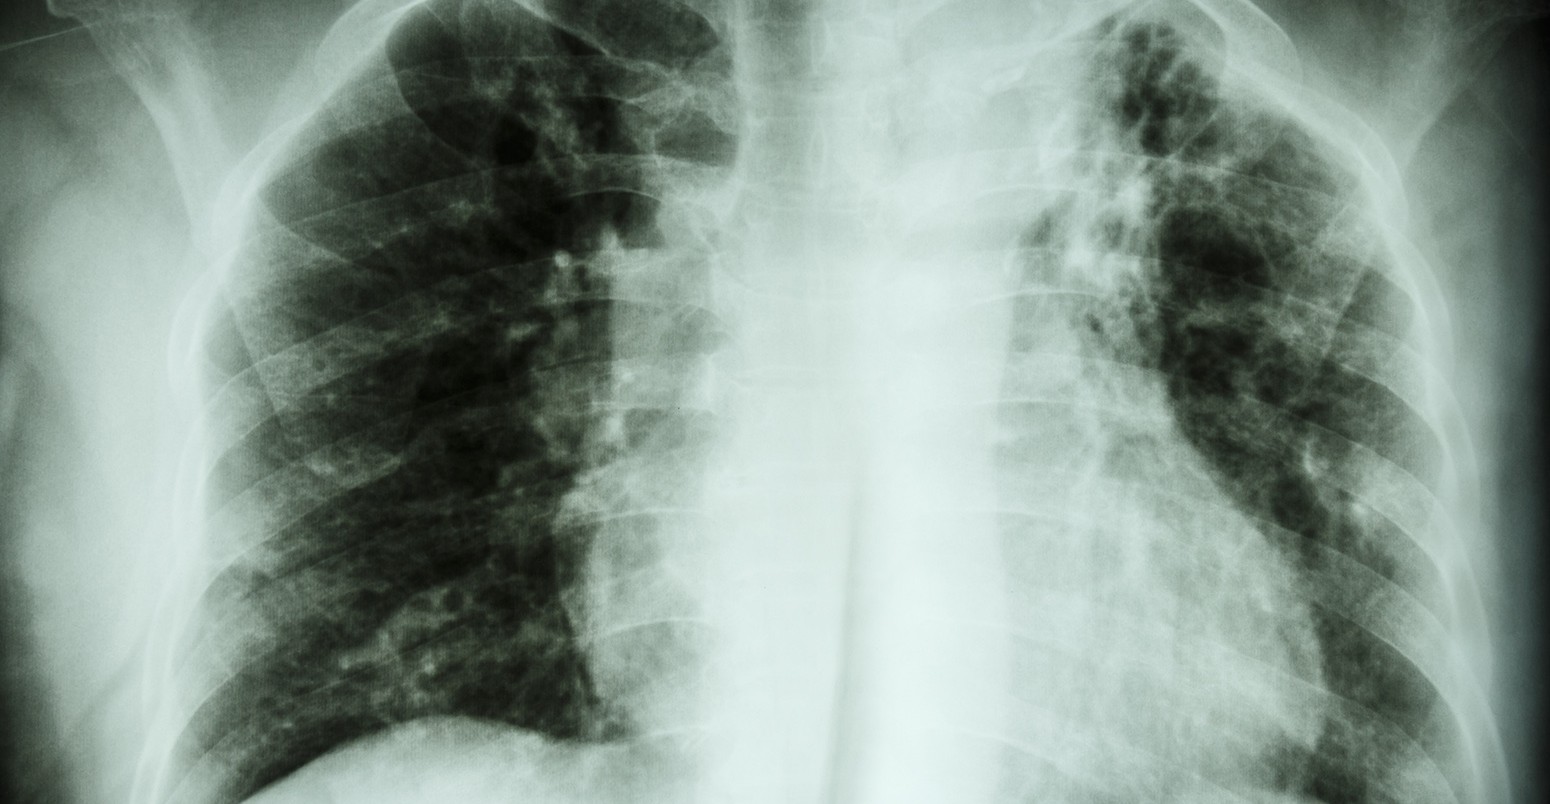 Chest X-ray of pulmonary tuberculosis